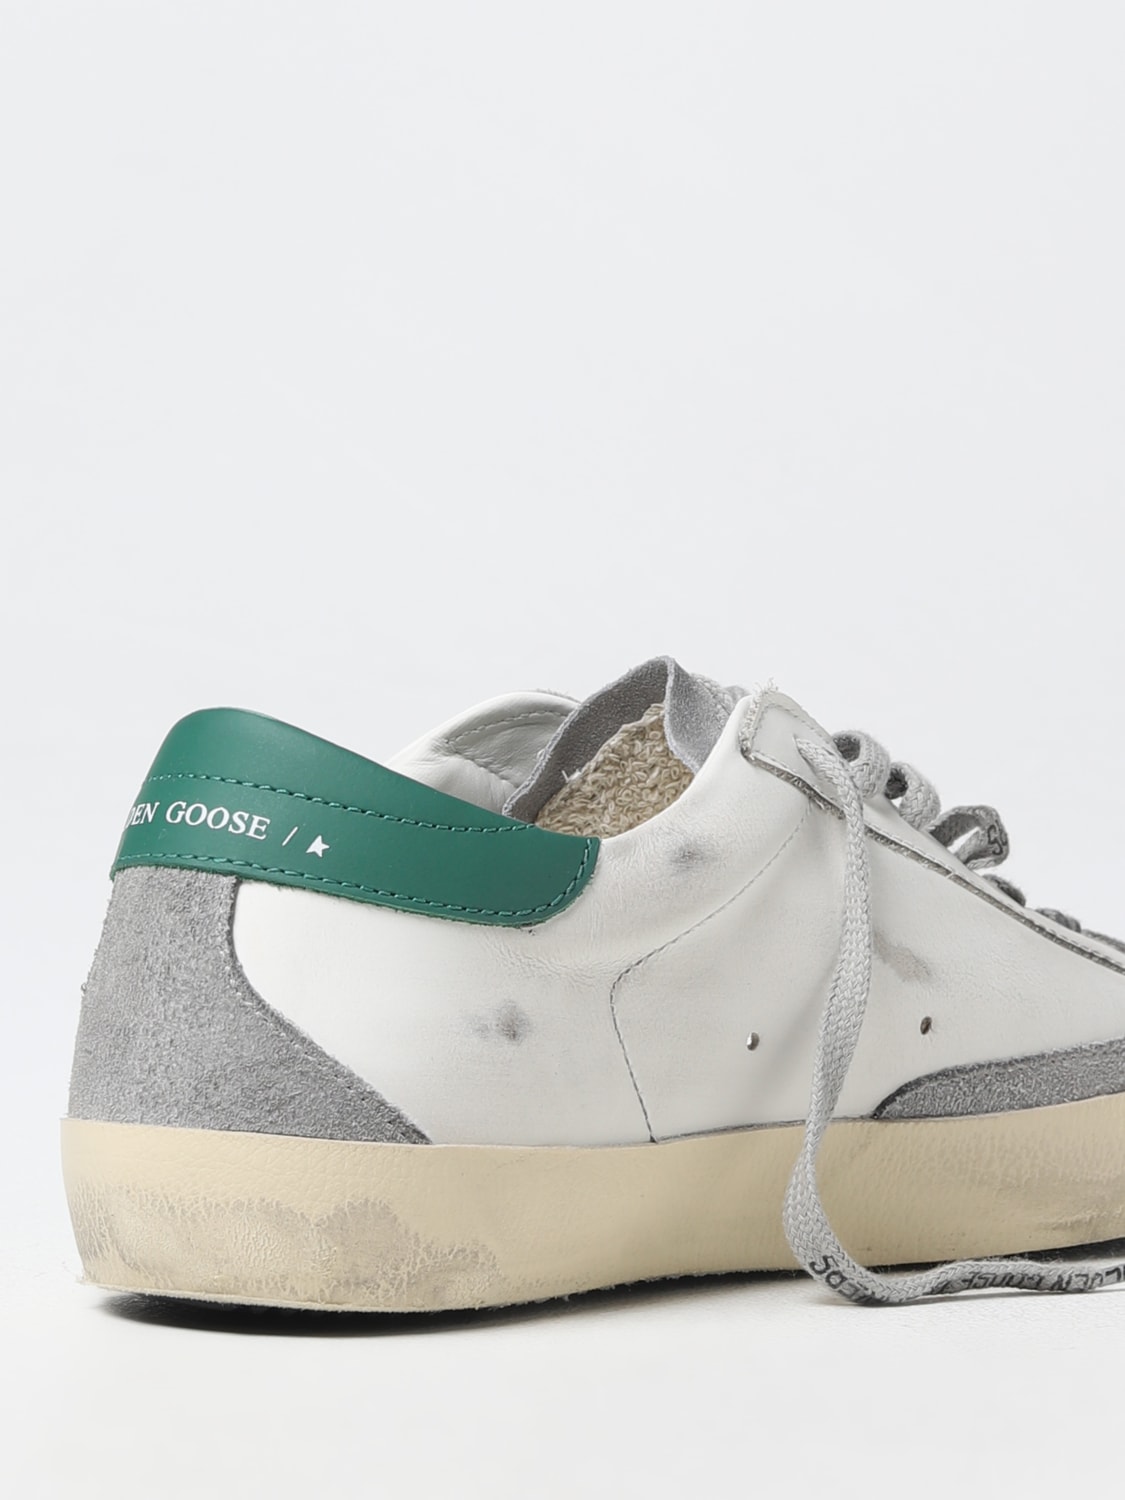 GOLDEN GOOSE: Super-Star Classic sneakers in used leather - White ...